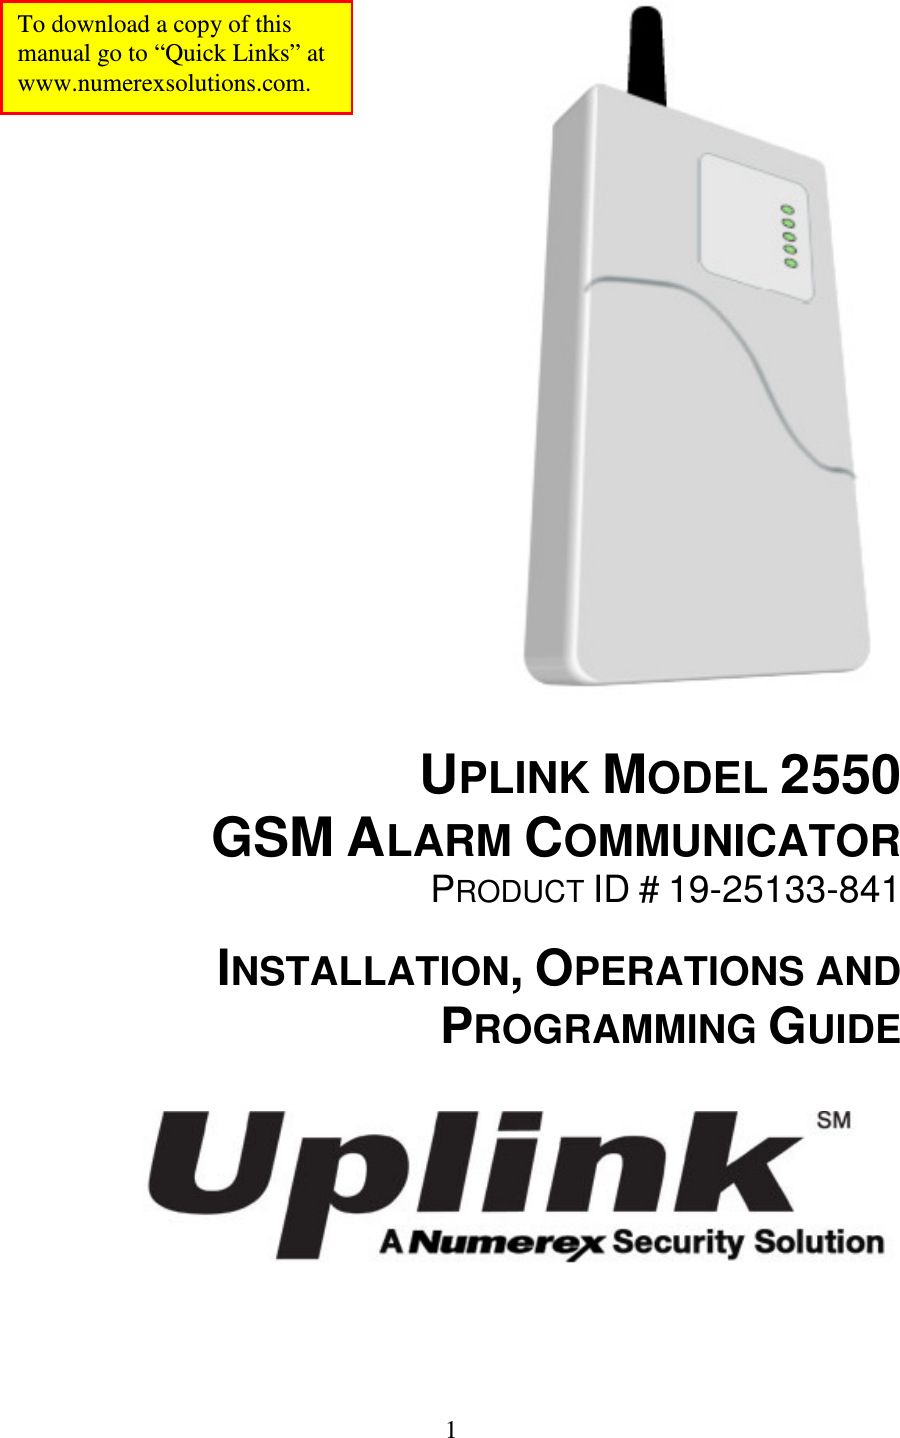   1                                     UPLINK MODEL 2550 GSM ALARM COMMUNICATOR PRODUCT ID # 19-25133-841  INSTALLATION, OPERATIONS AND PROGRAMMING GUIDE    To download a copy of this manual go to “Quick Links” at  www.numerexsolutions.com. 